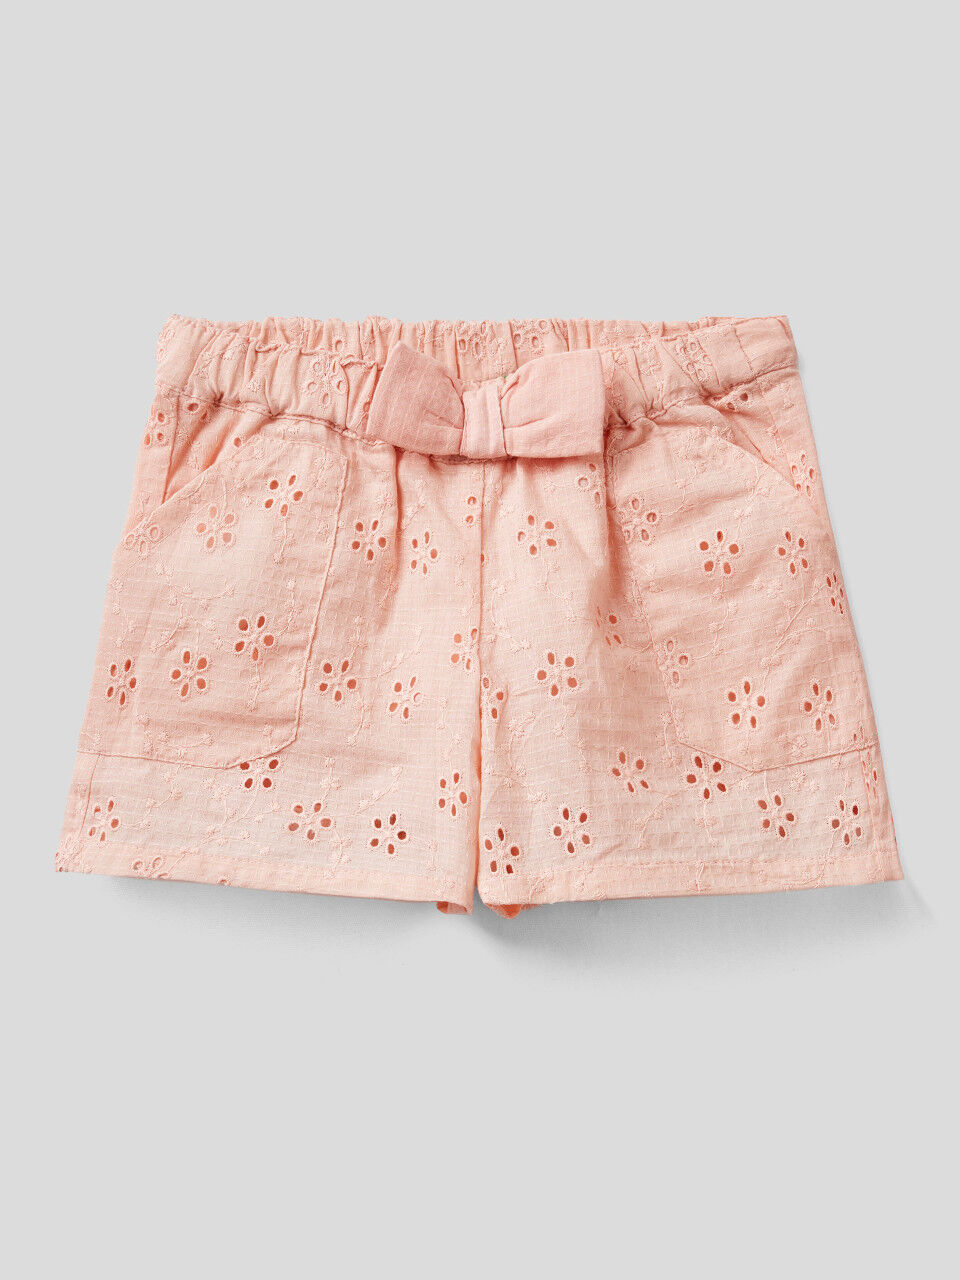 Shorts in broderie anglaise with bow